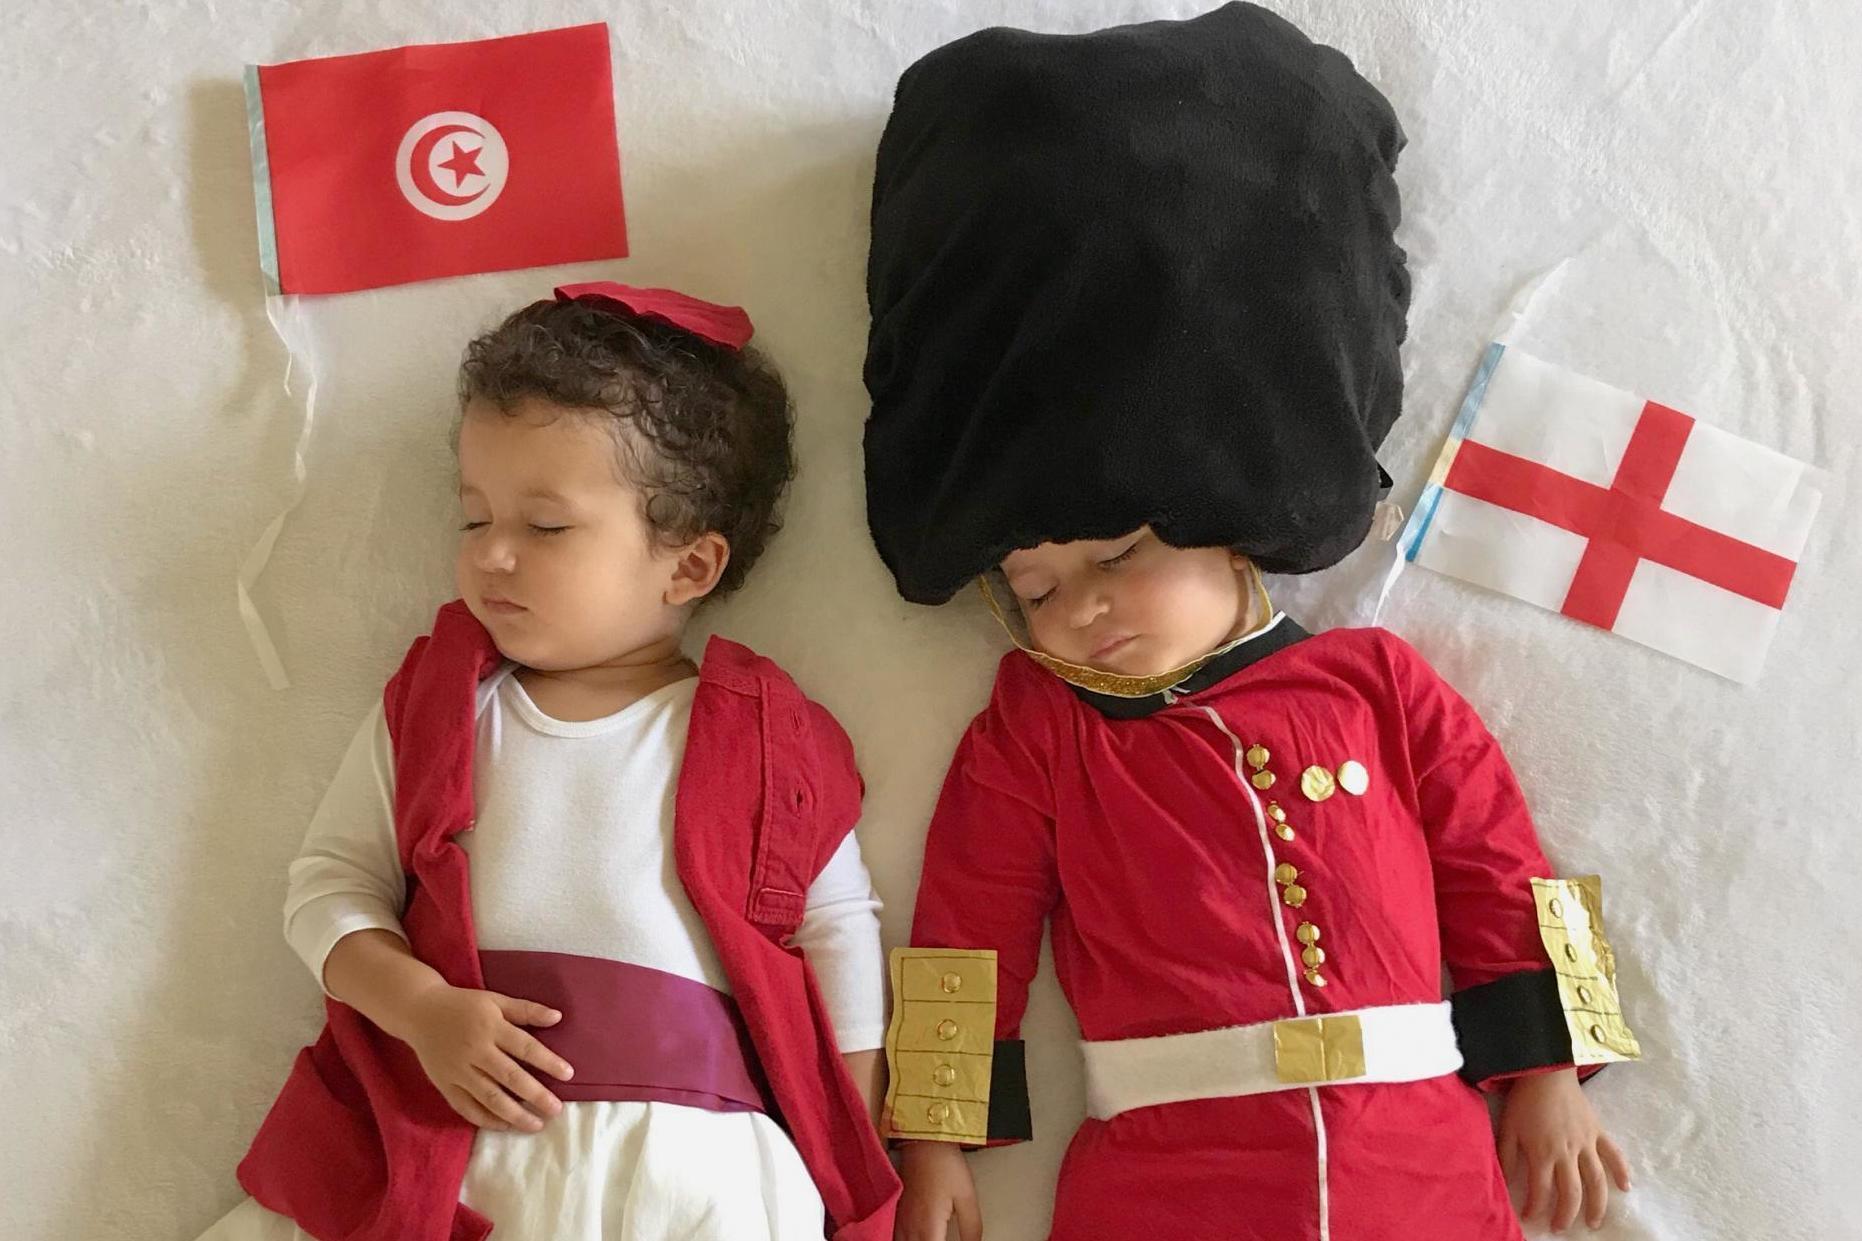 Two-year-old toddlers are dressed as opposing teams in the World Cup (SWNS)